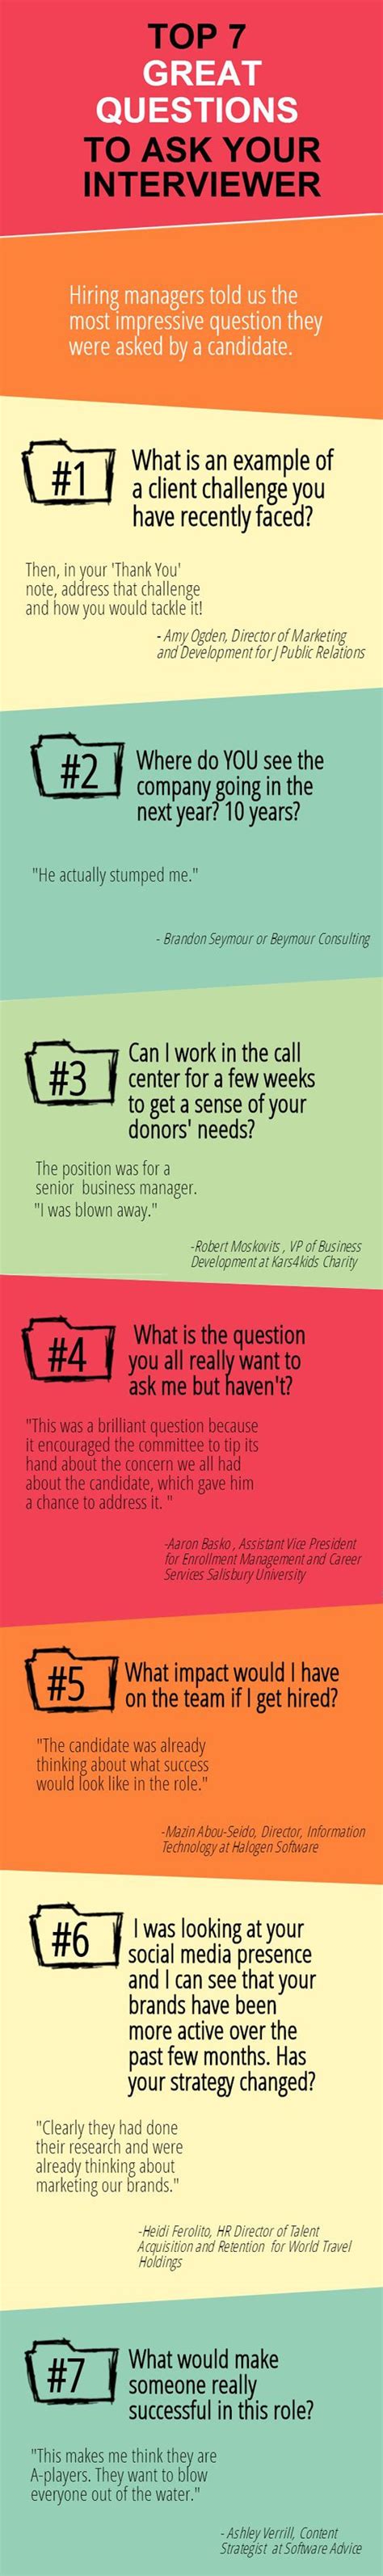 These questions are enough to have an list of good questions to ask: Interview Questions to Ask an Interviewer - The Muse